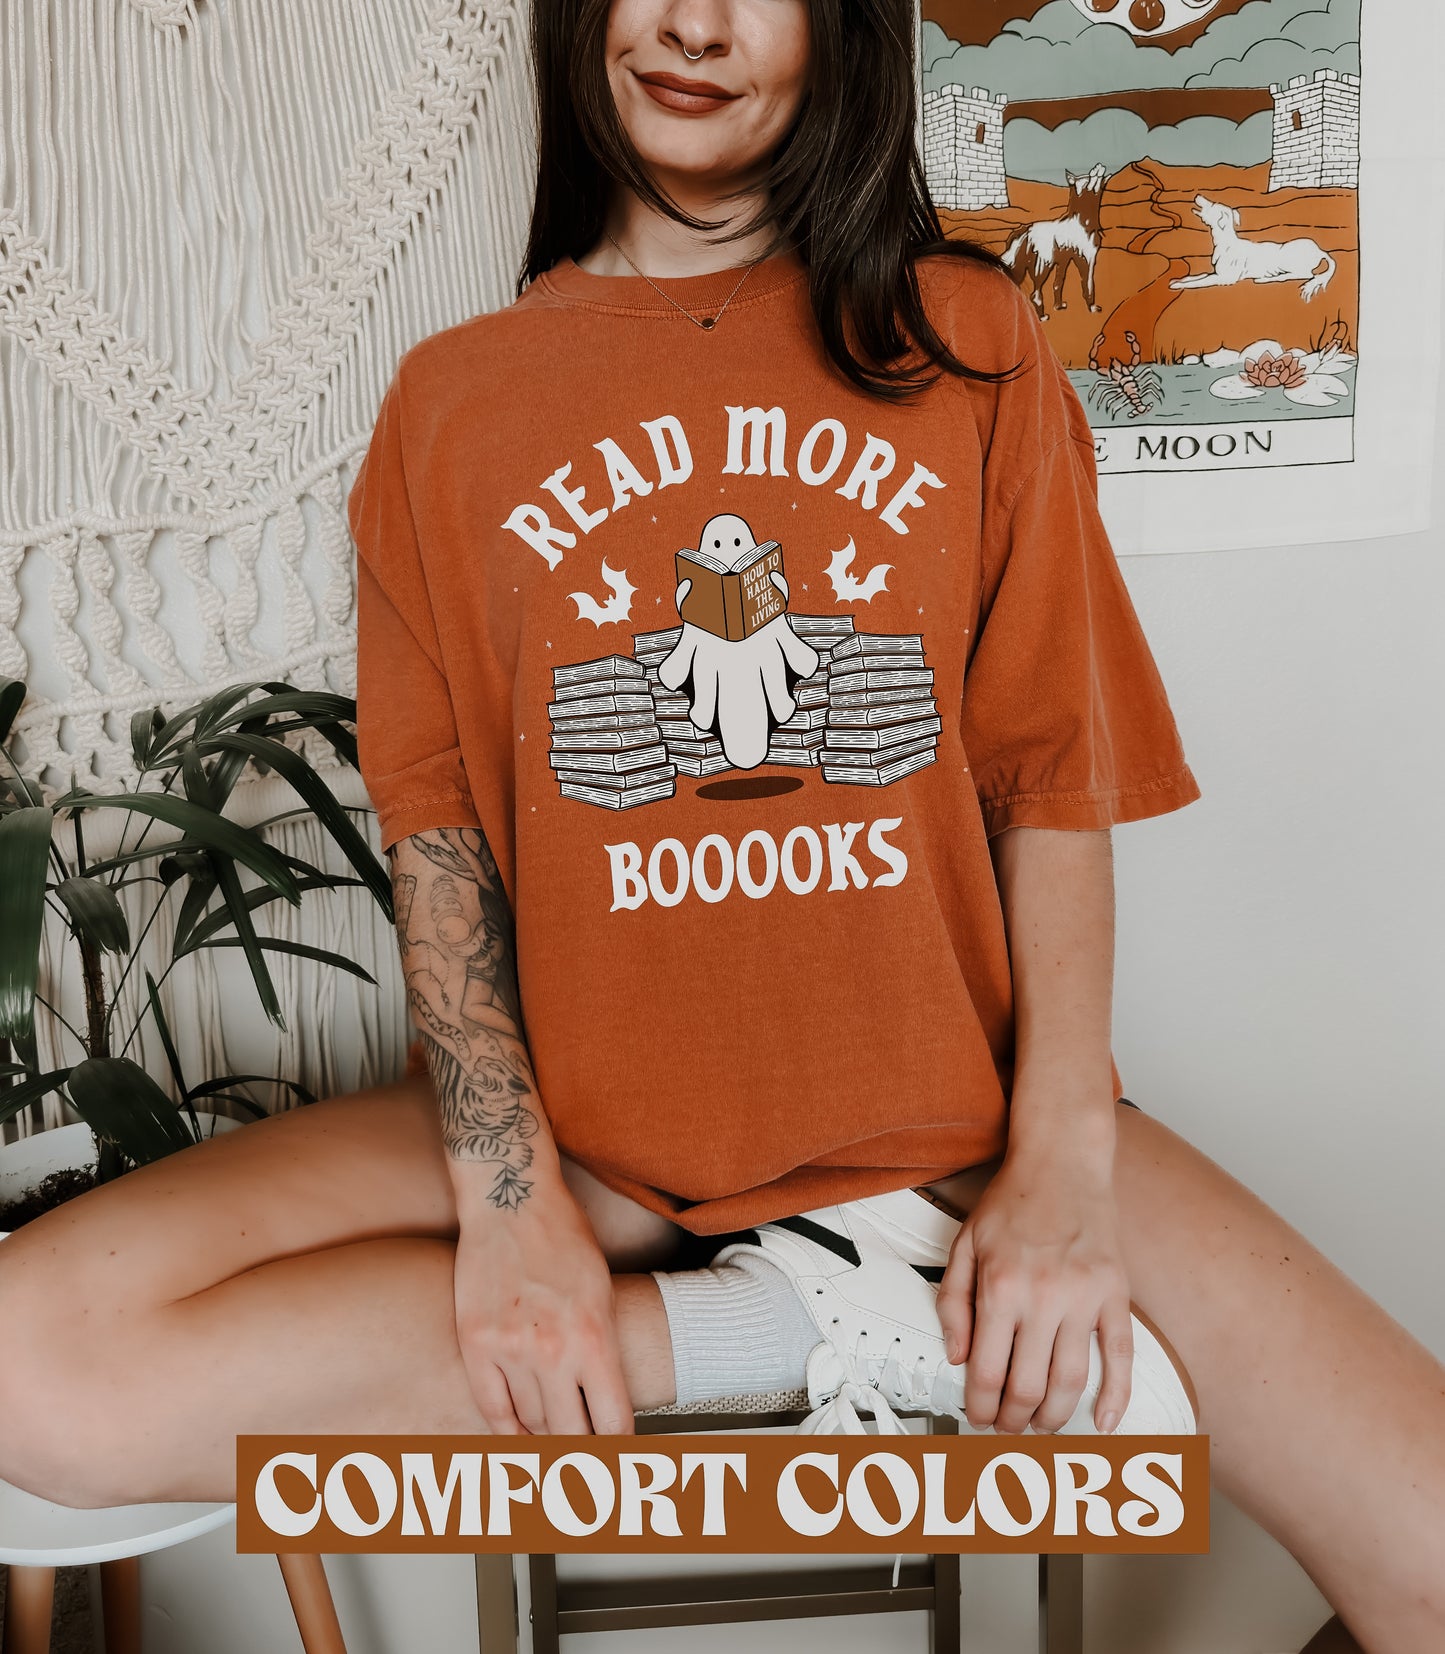 Read More Books Ghost Shirt